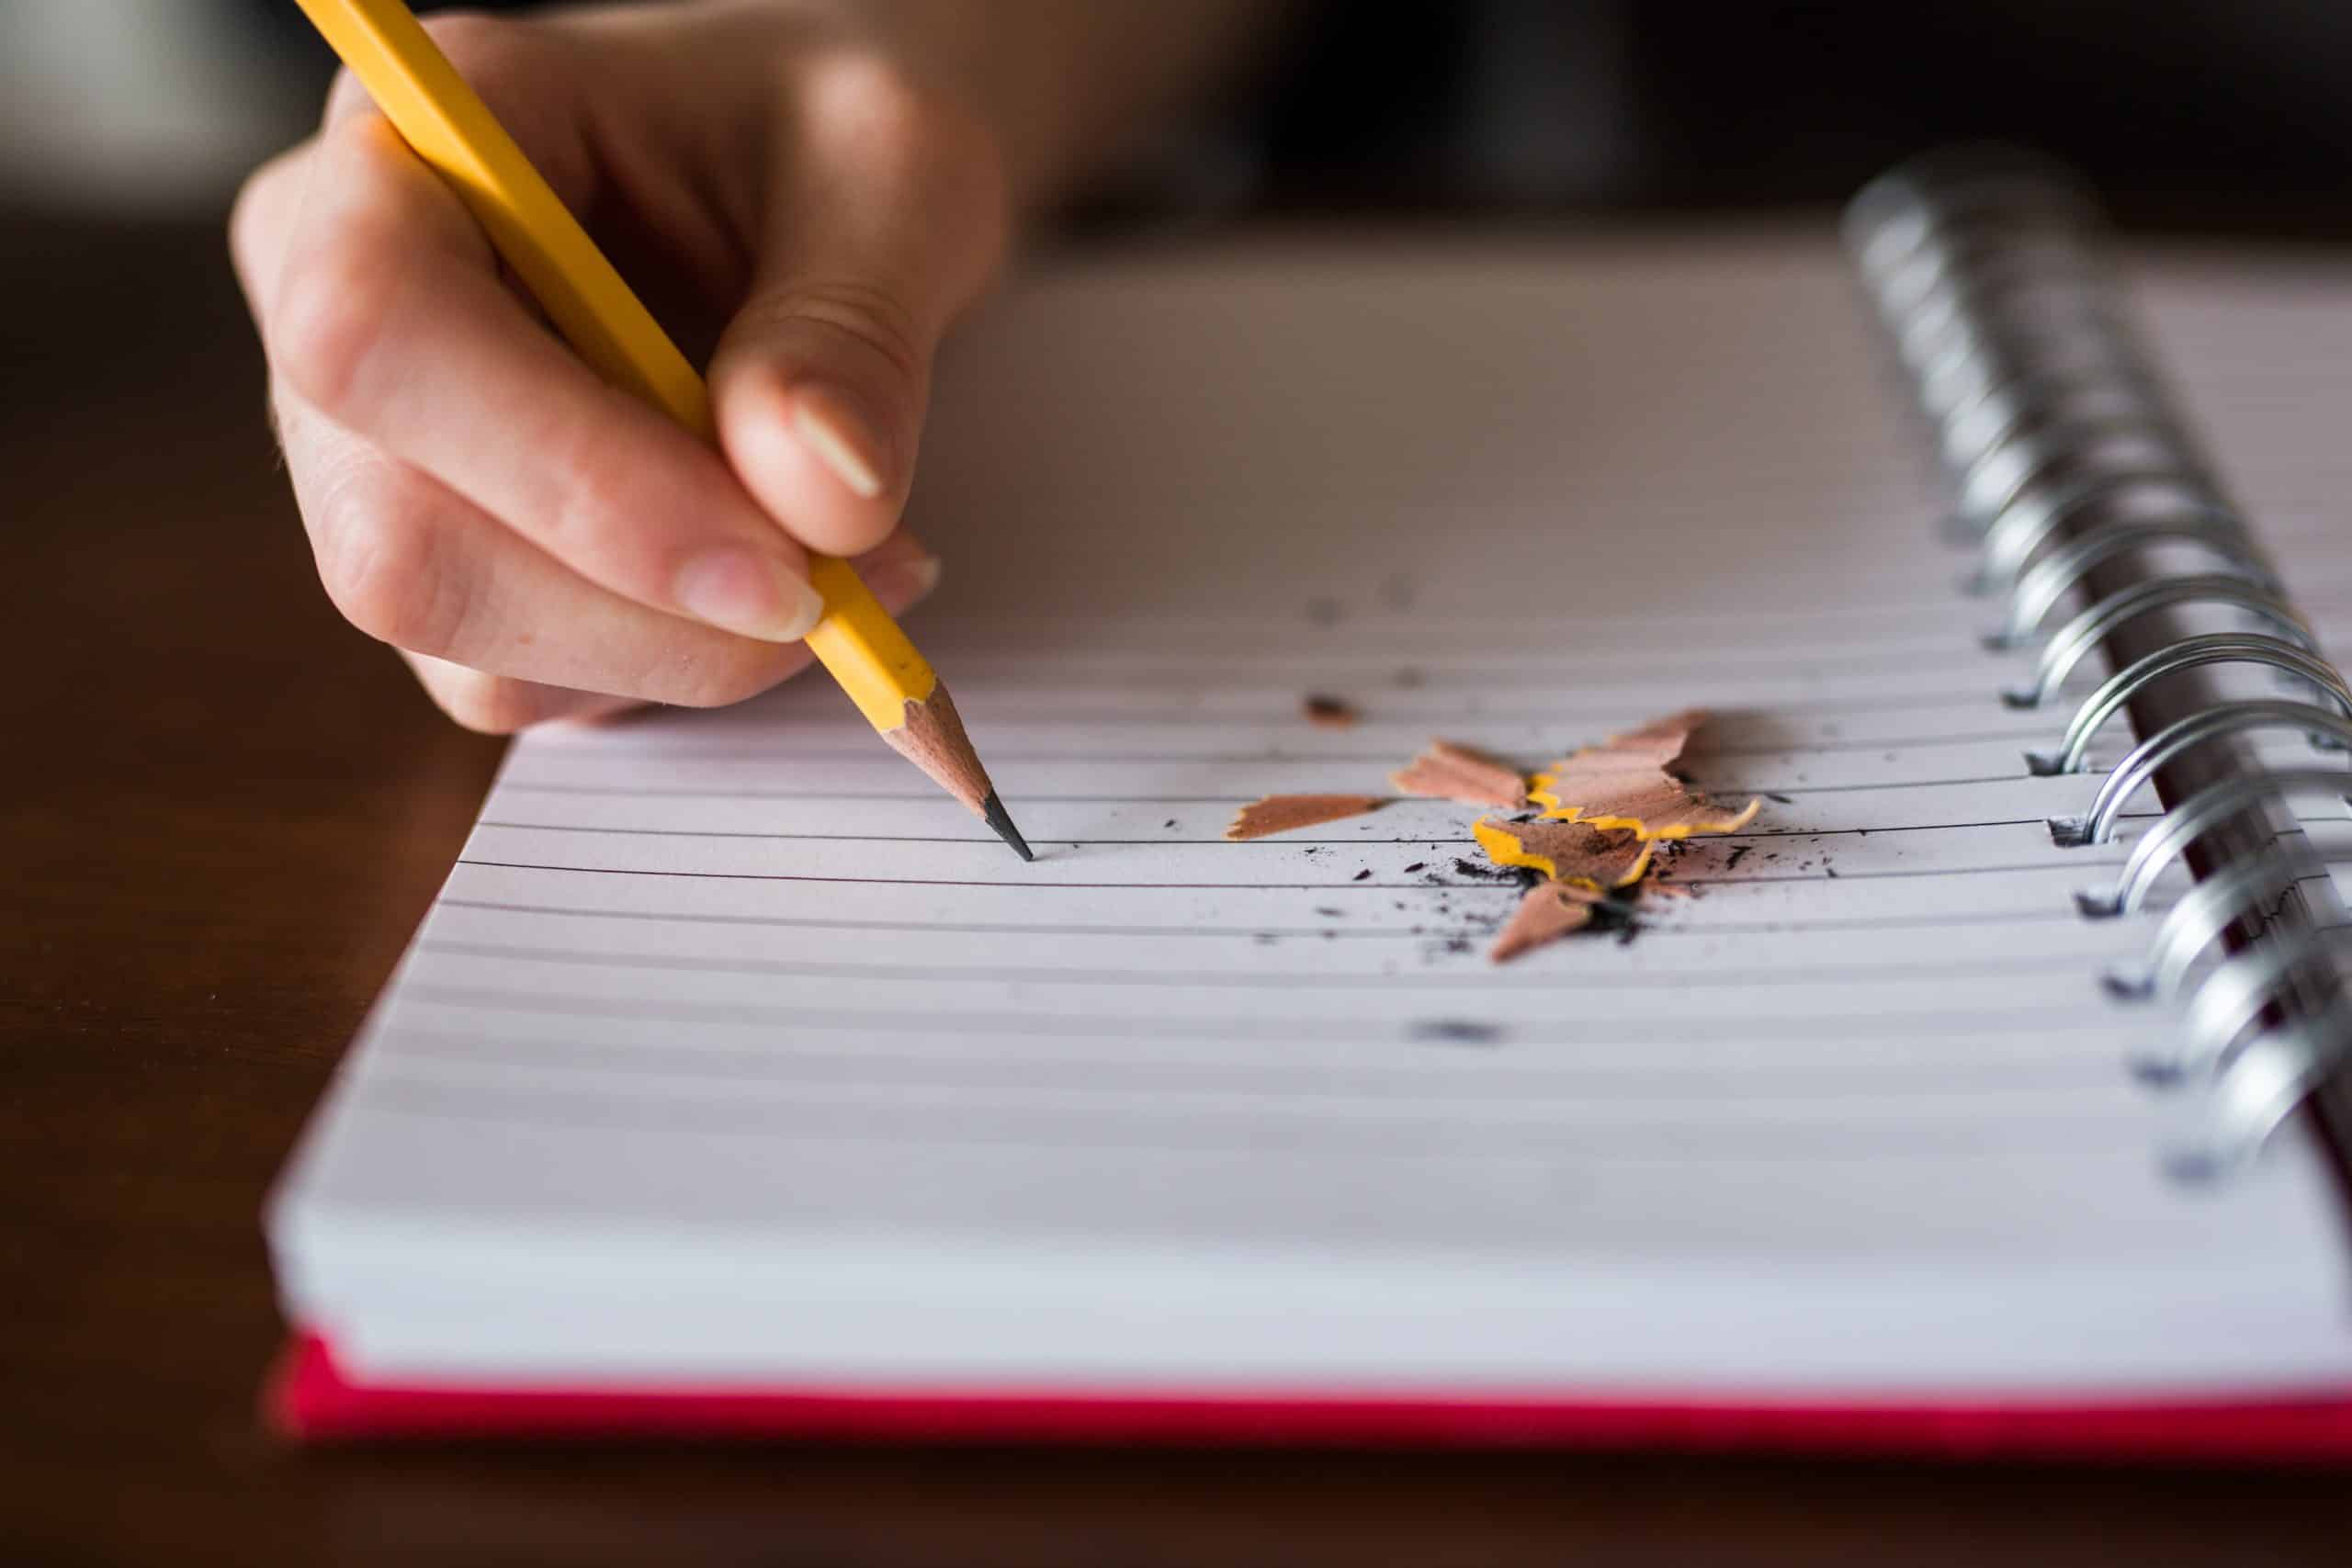 students should write about their path to education 